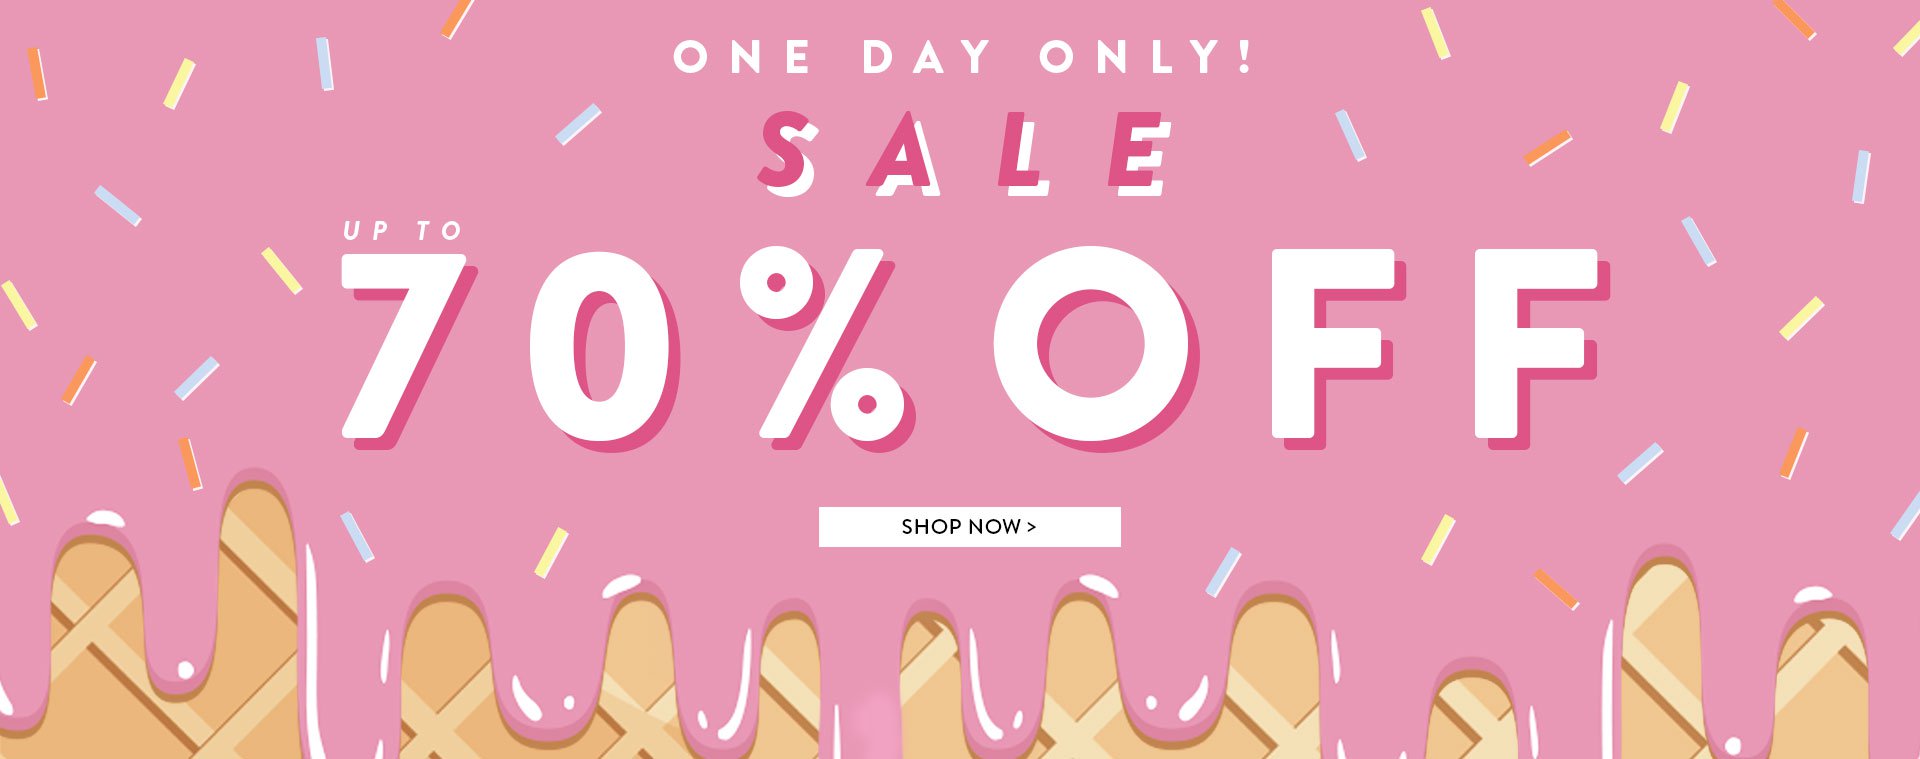 Boohoo: Sale up to 70% off women's clothing